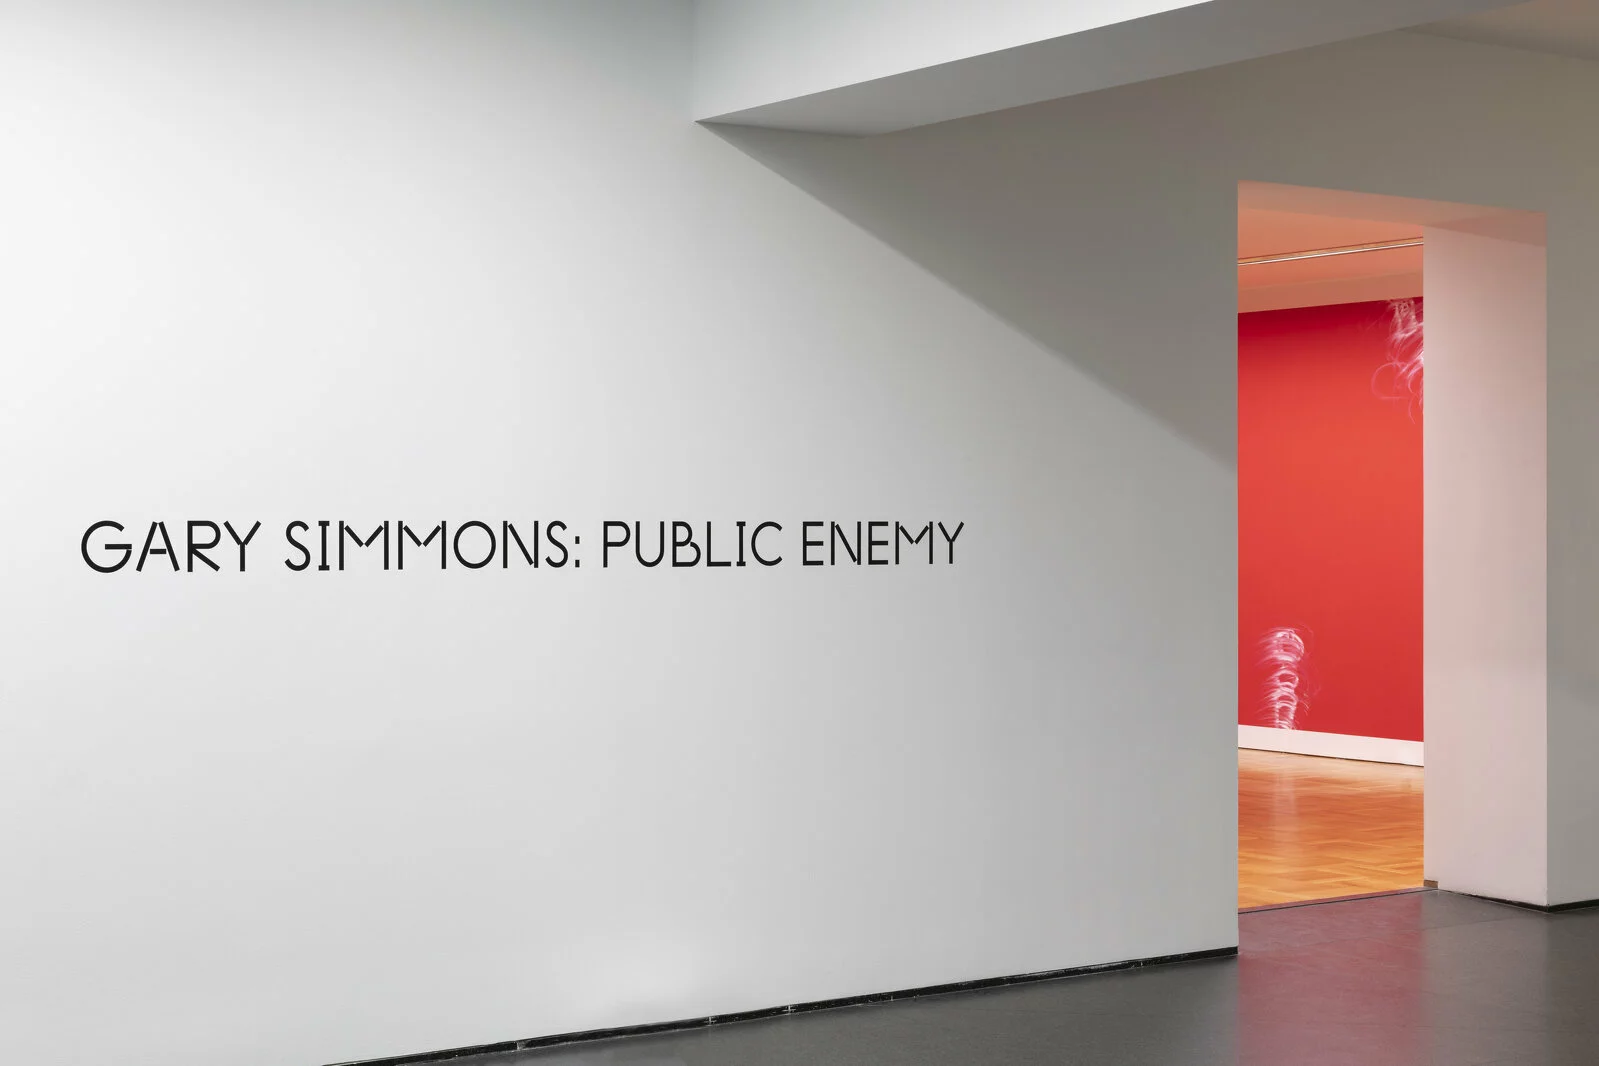 A sliver of a room painted red with white drawings on it is just visible beyond a wall with black text that reads Gary Simmons: Public Enemy.